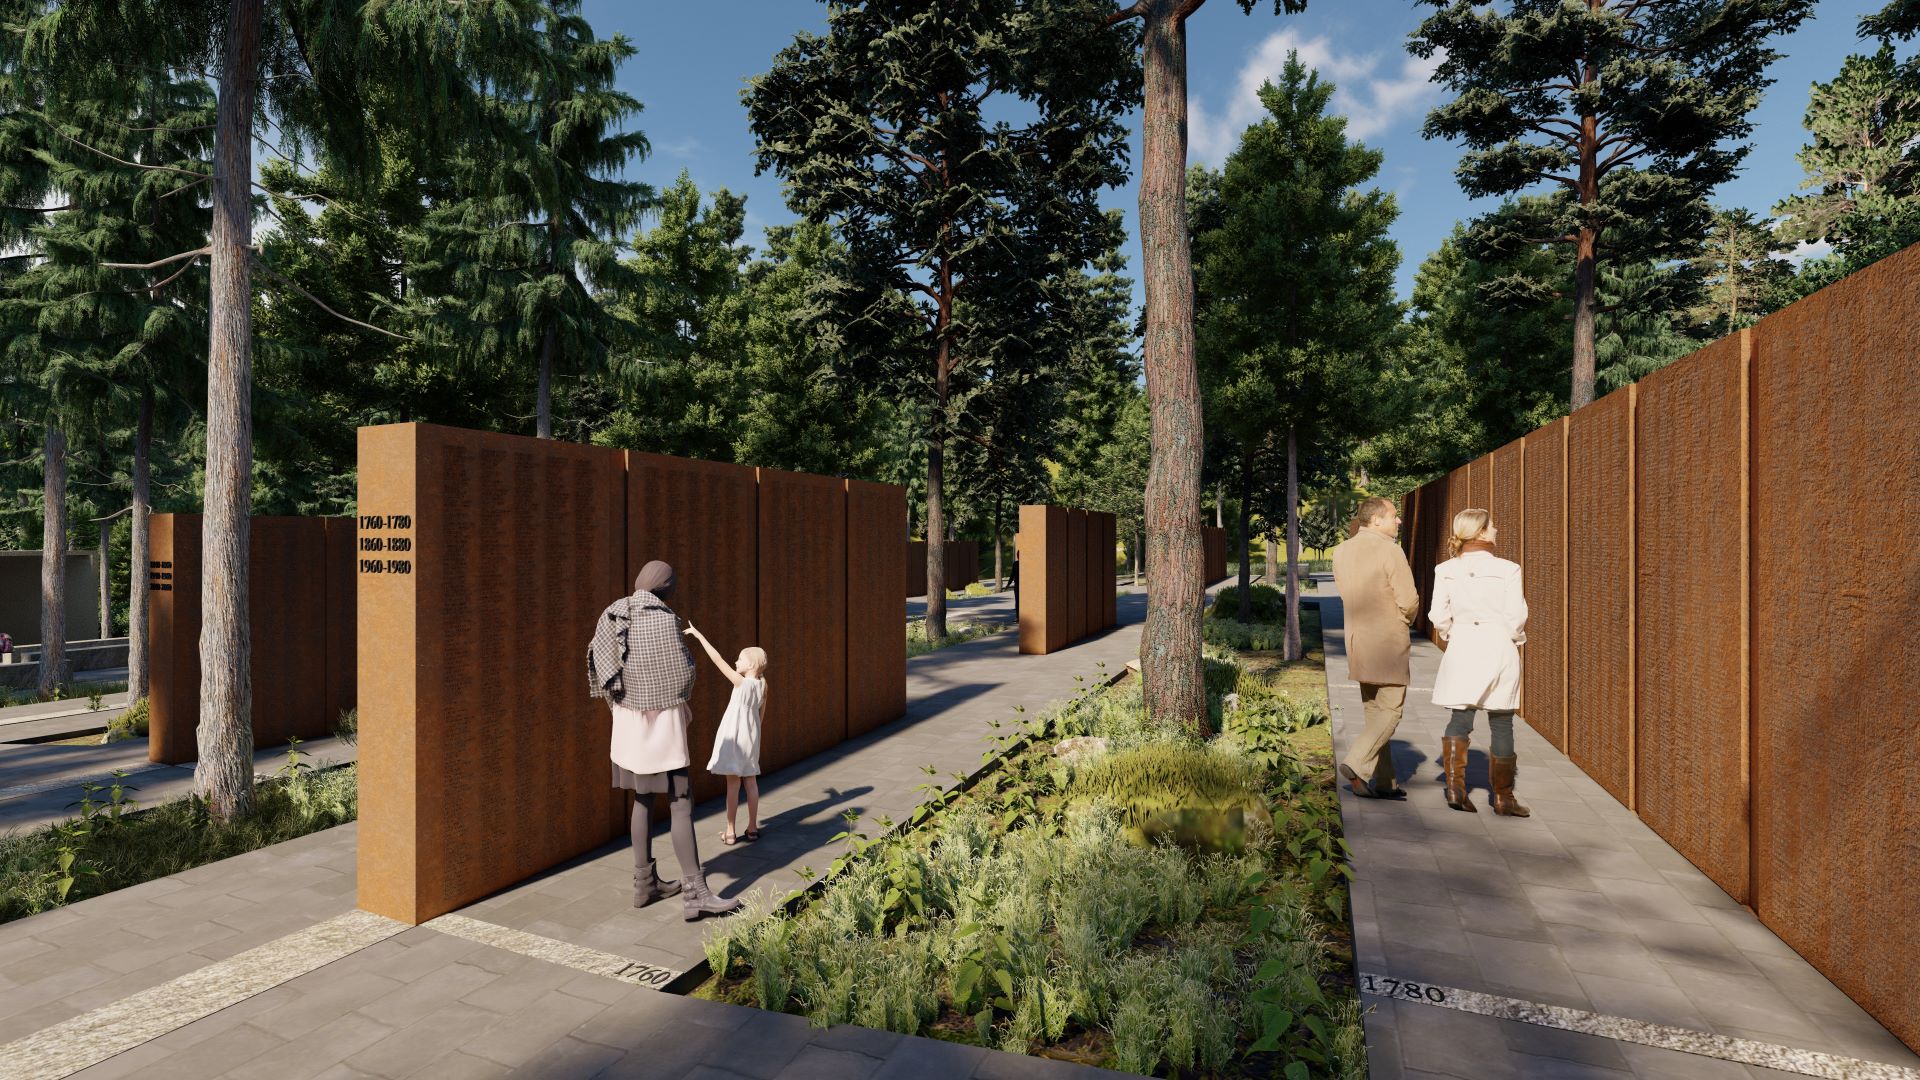 A rendering of how the memorial walls will look